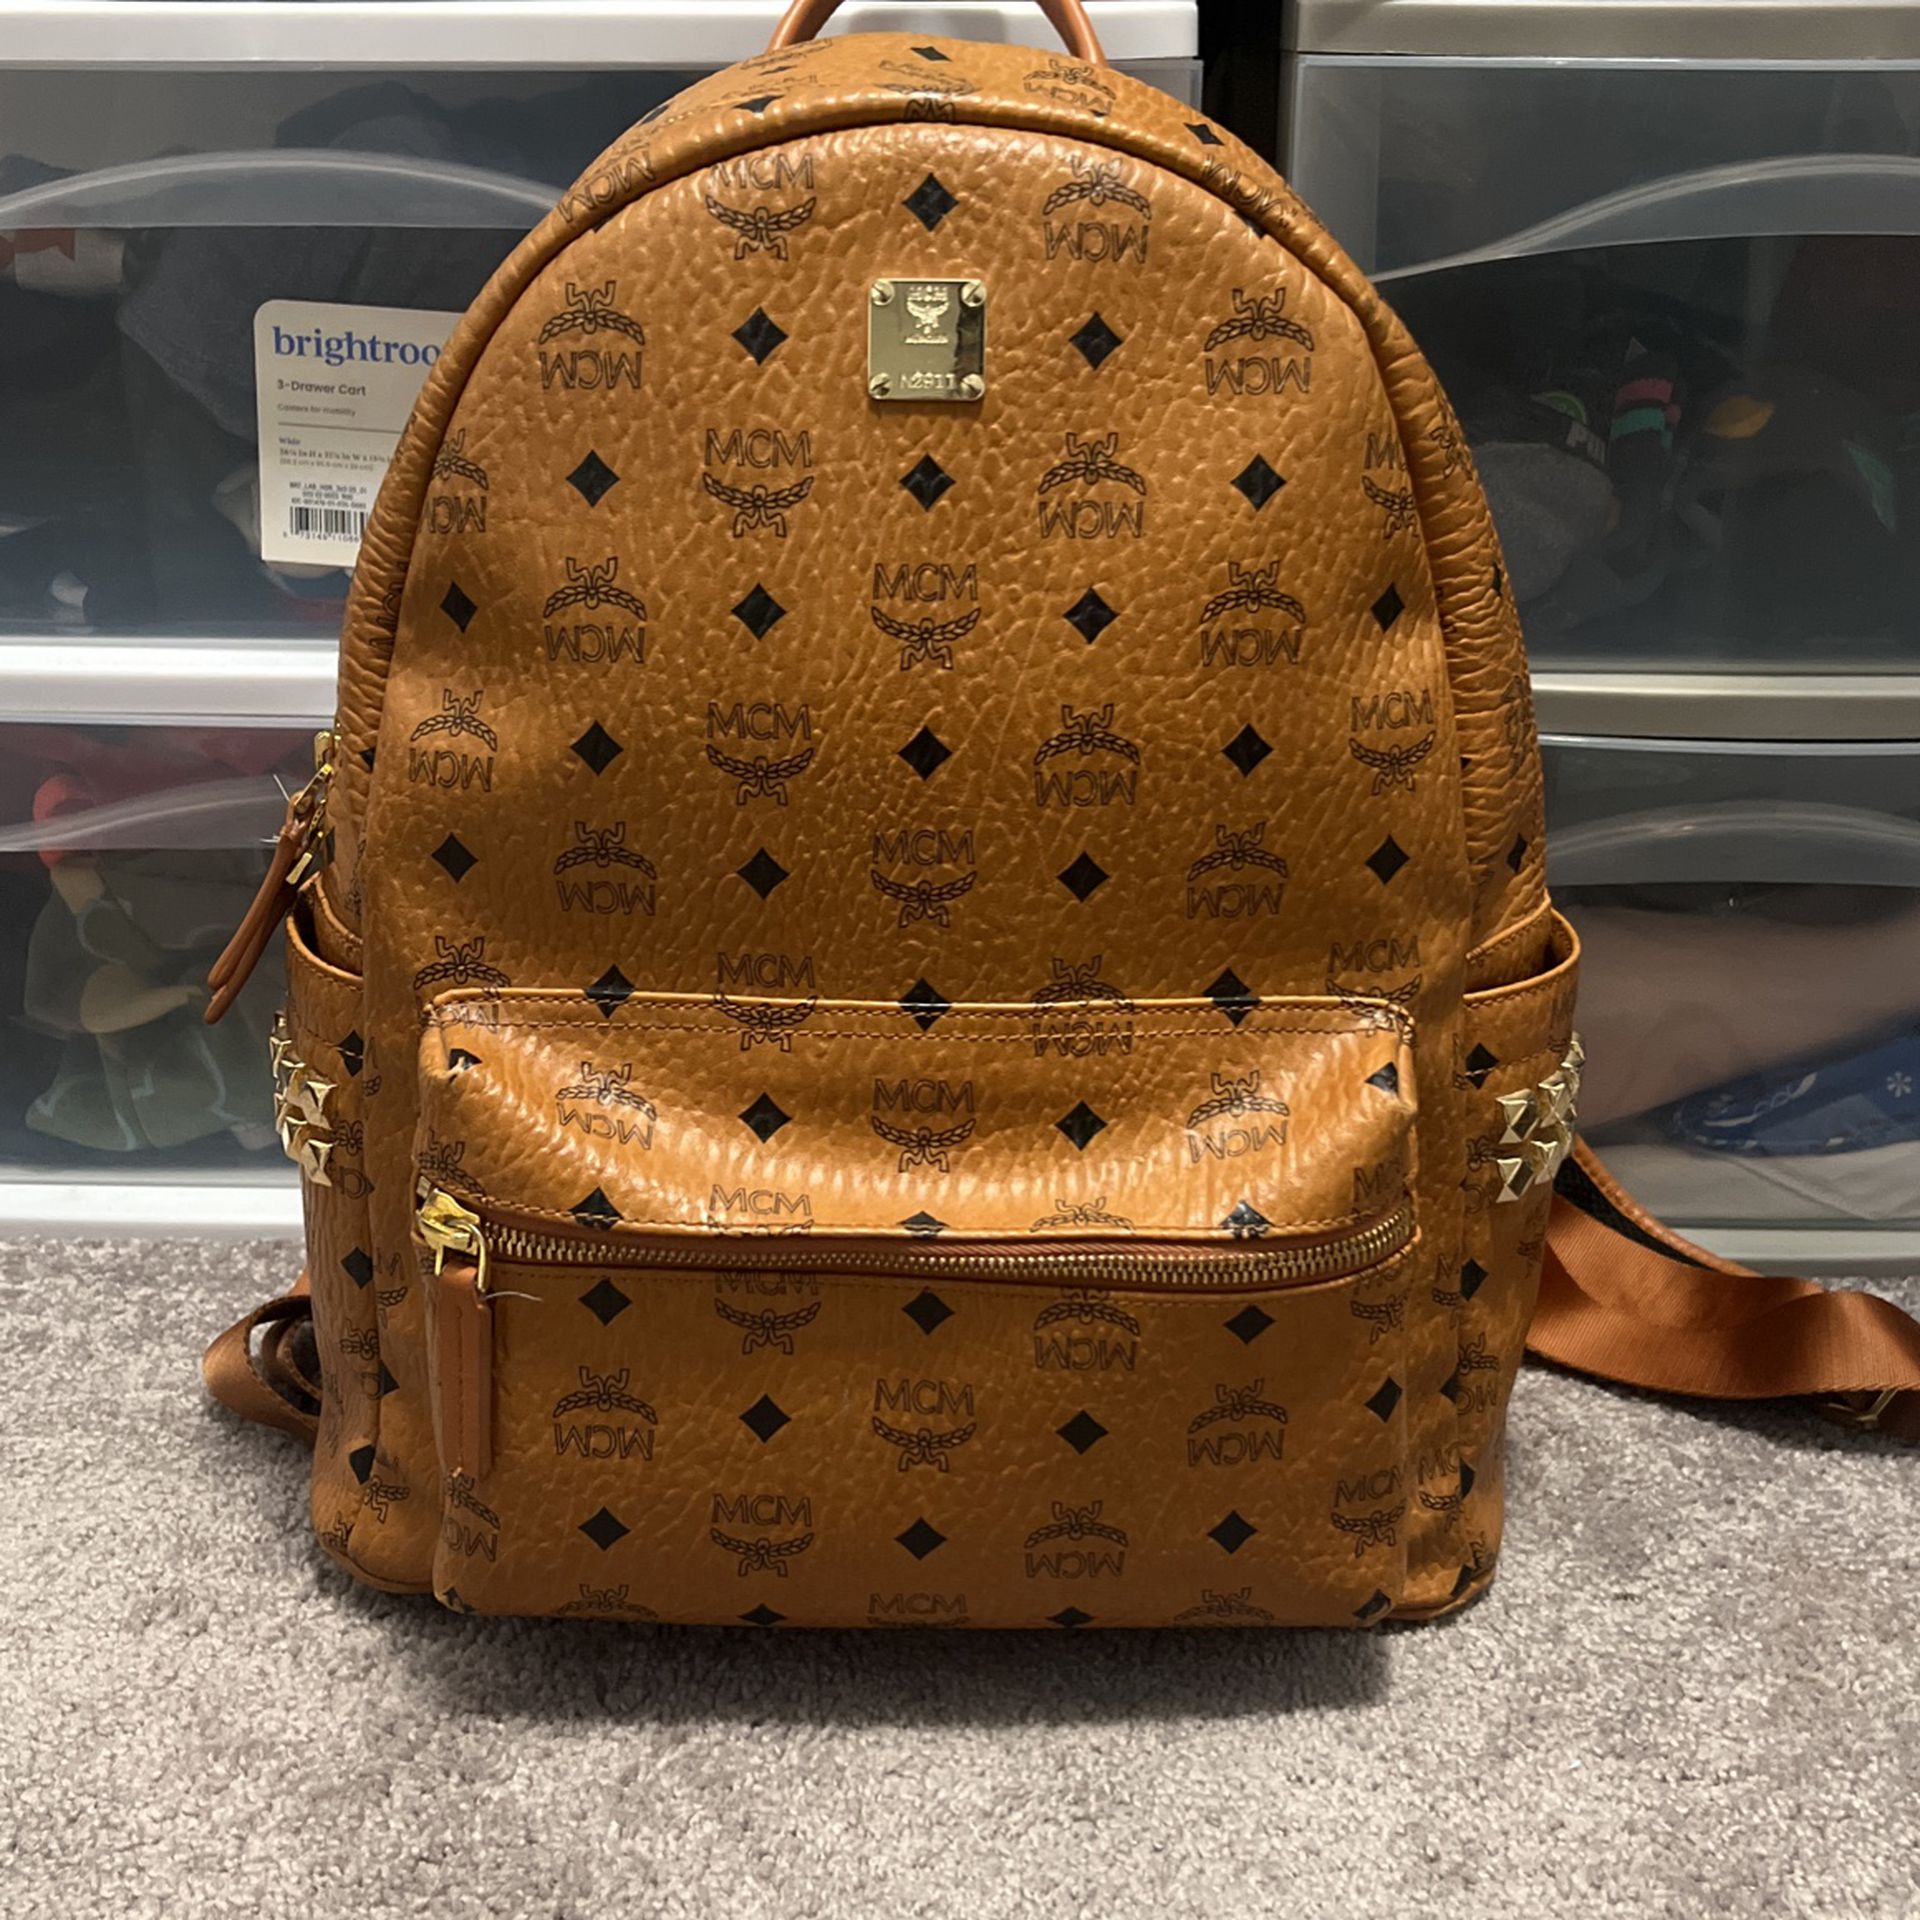 Red MCM BackPack for Sale in Scotch Plains, NJ - OfferUp